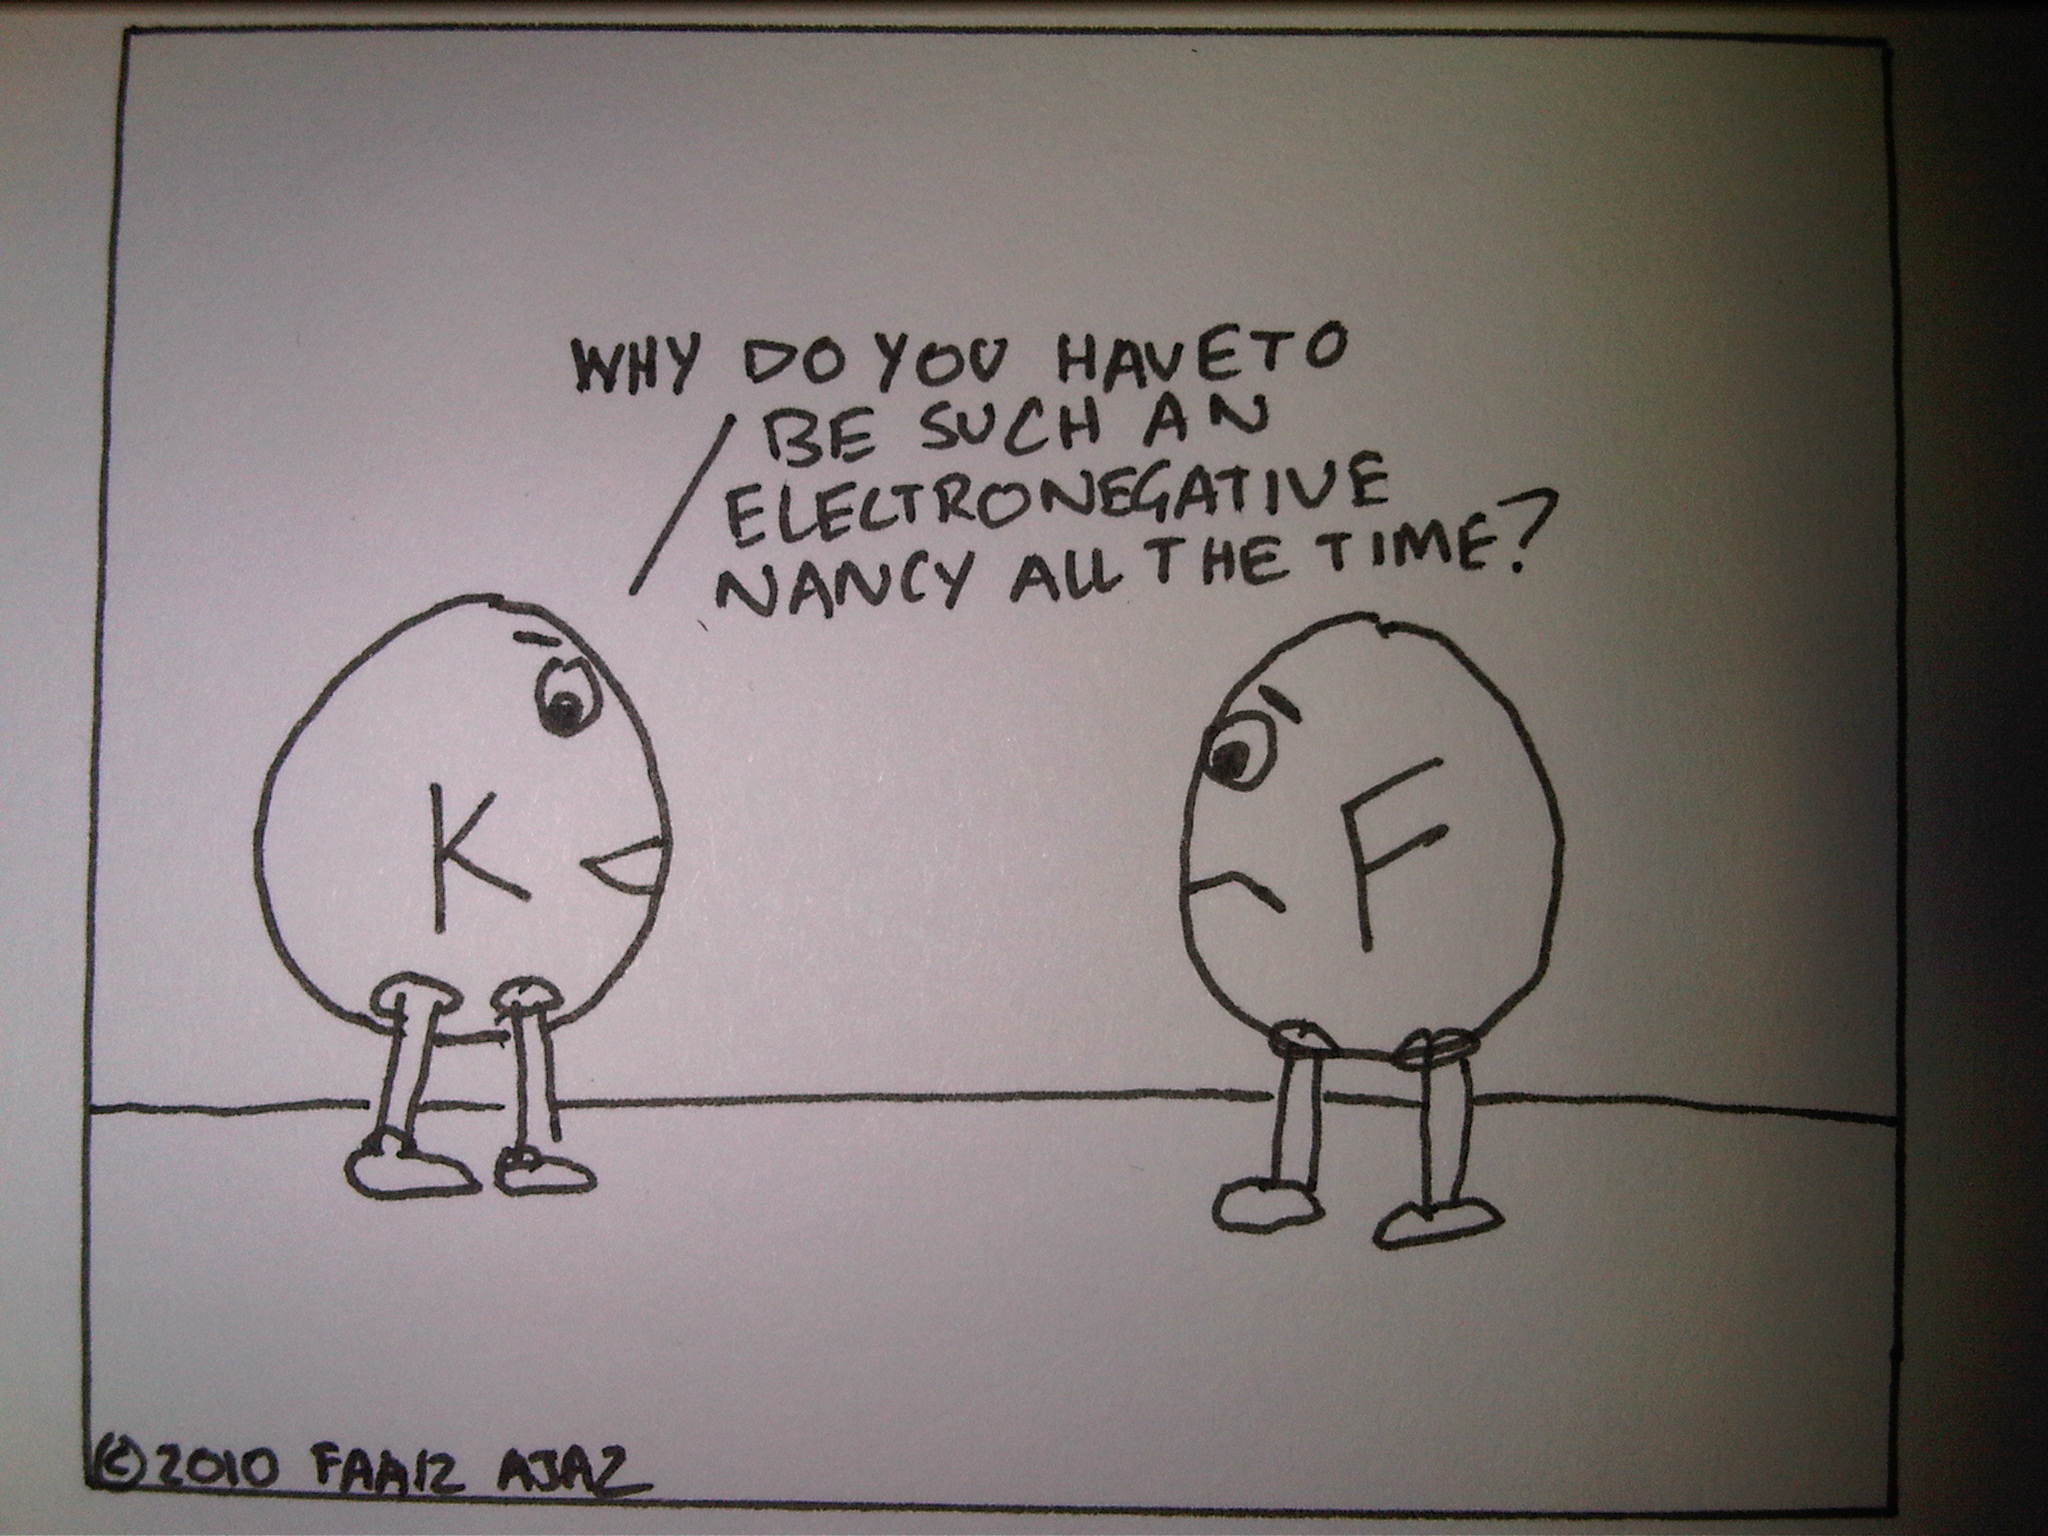 2048x1536, Chemistry Jokes Are Funny Silly Little Drawings -  Electronegativity Cartoon - 2048x1536 Wallpaper 